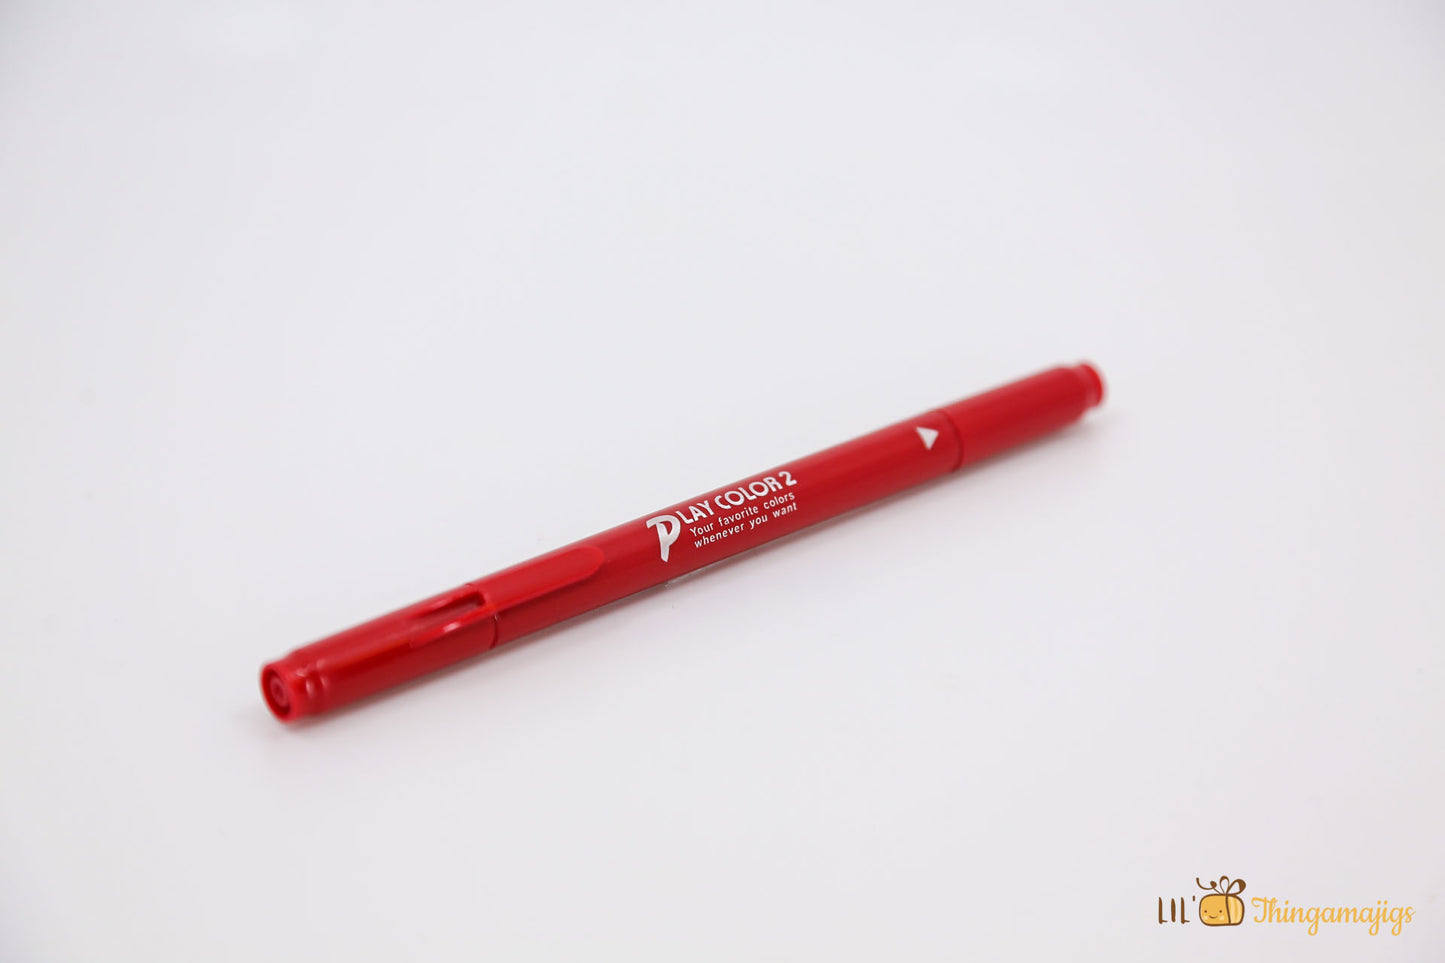 Tombow Play Color 2 Double-sided Marker - 0.4mm and 1.2mm